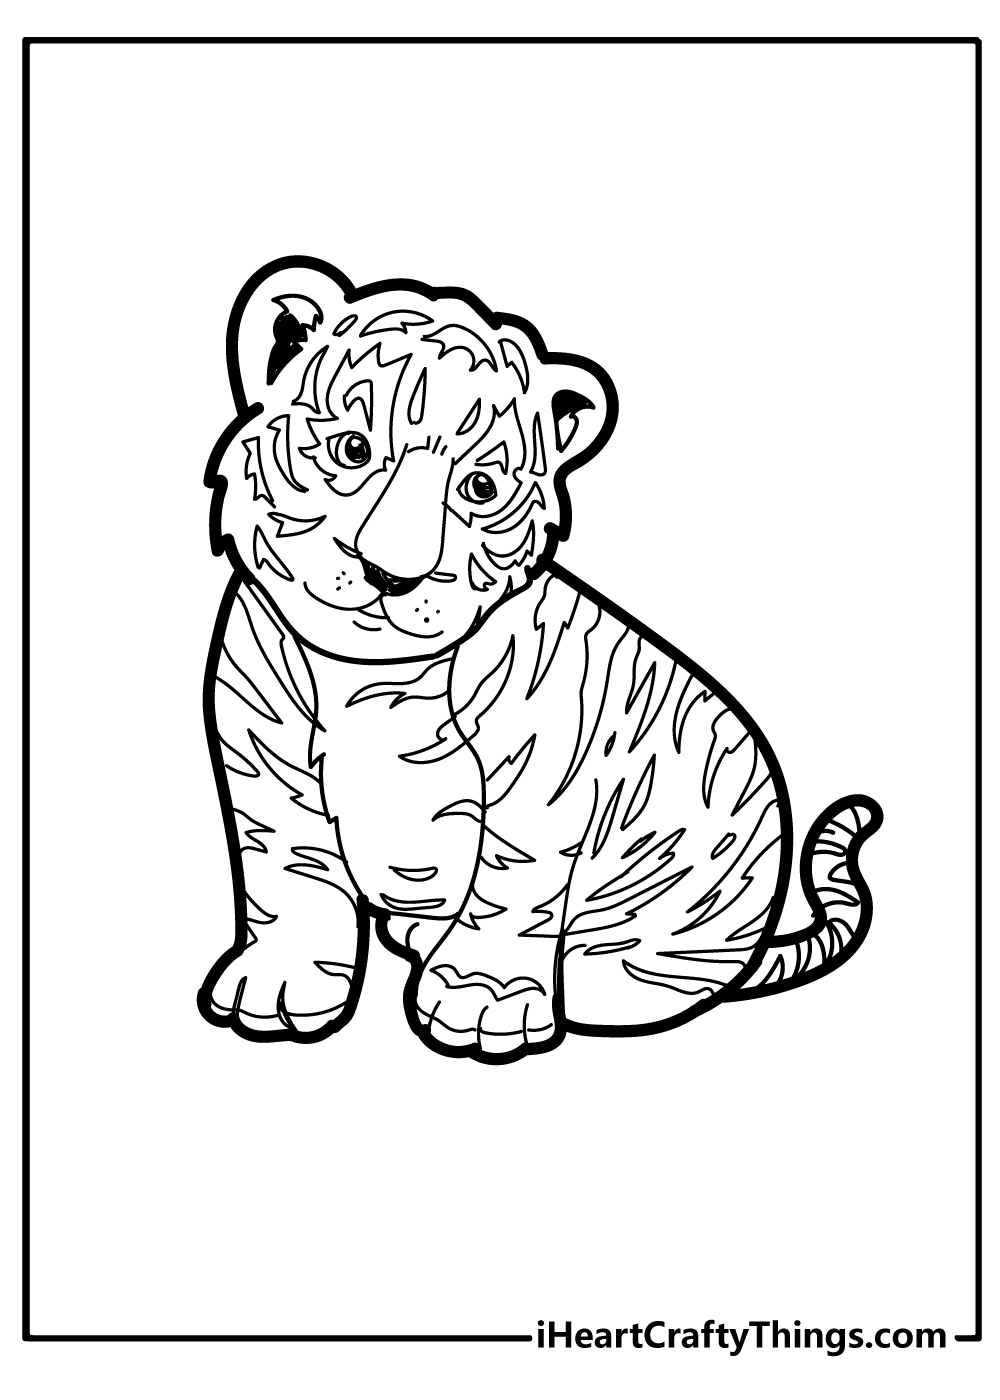 Printable tiger coloring pages free printables